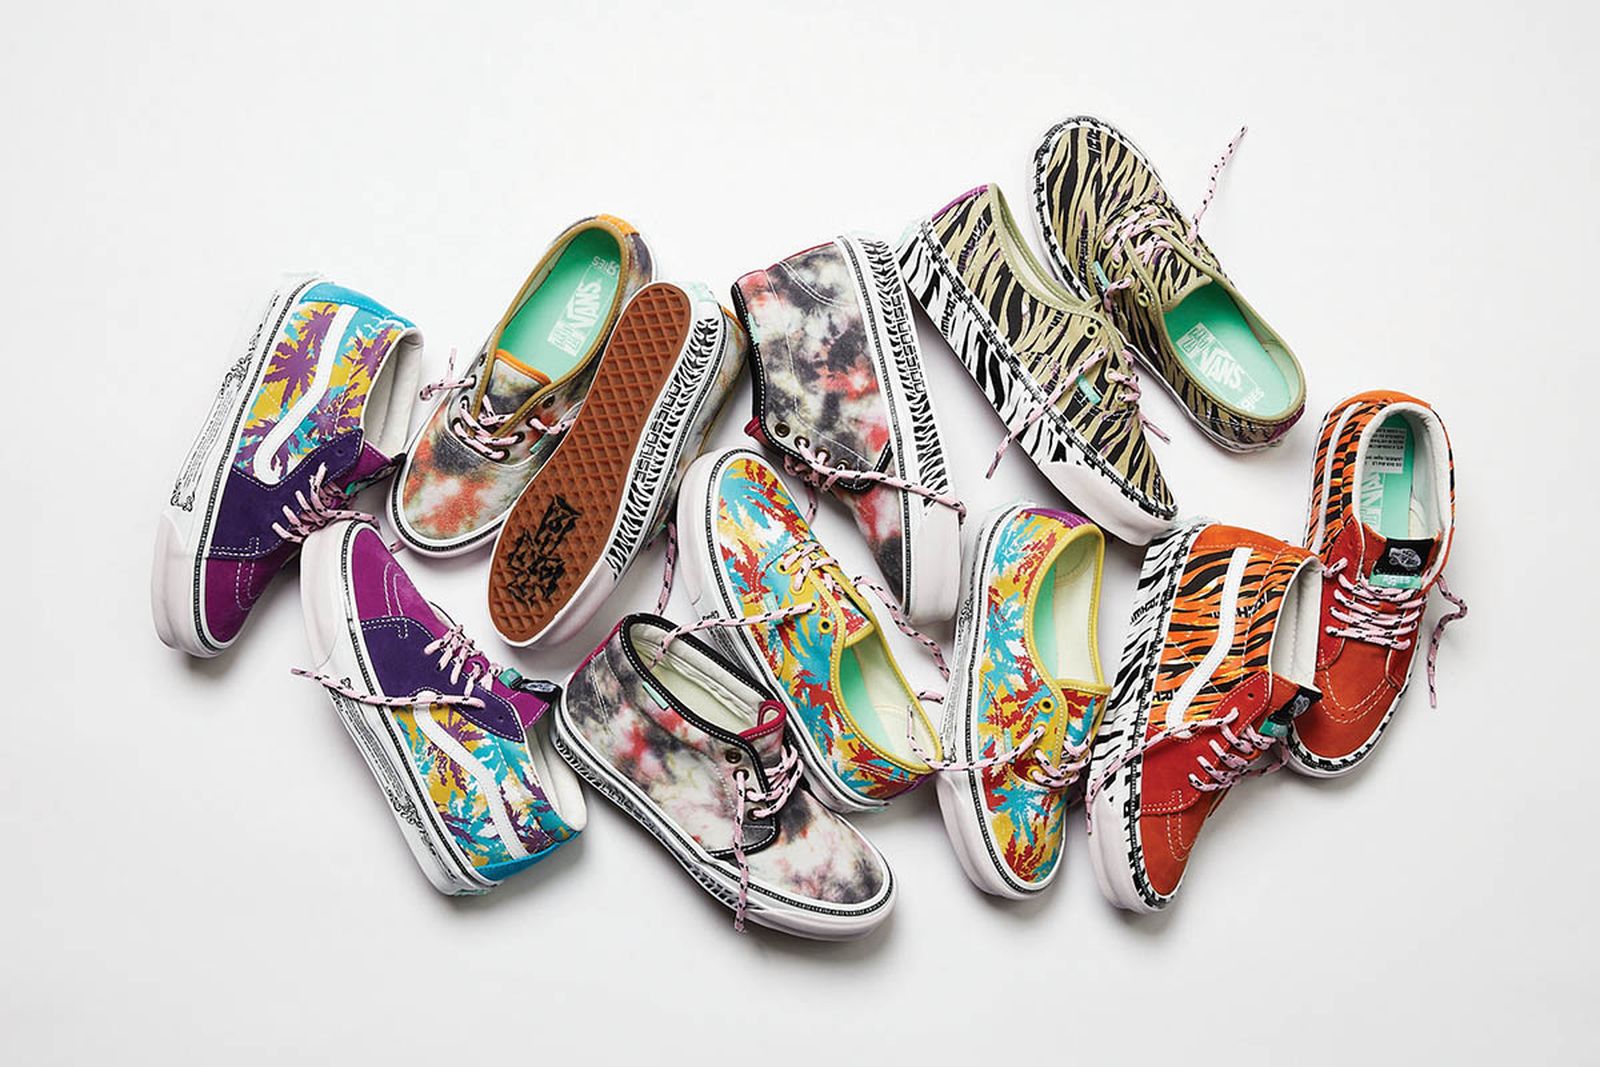 The Aries x Vault by Vans capsule collection.